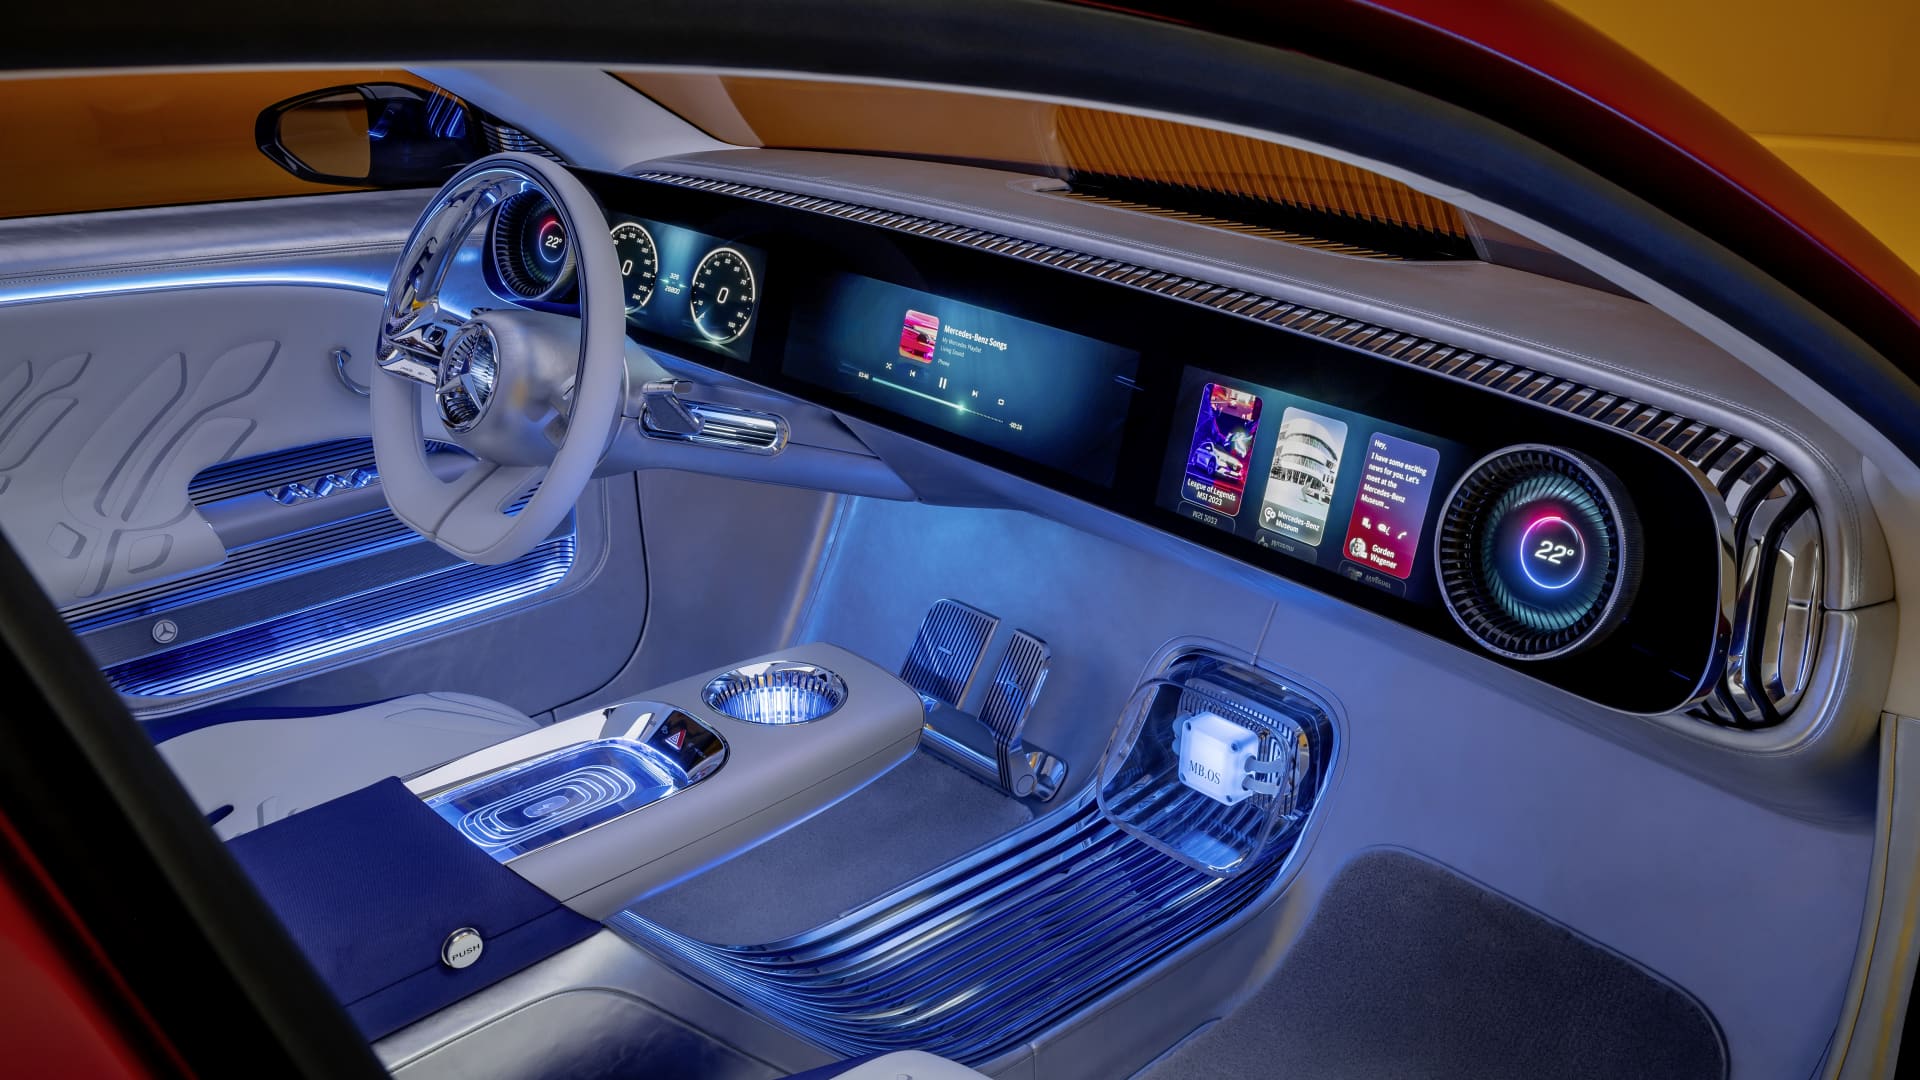 Mercedes said it focused on digitizing the interior of the Concept CLA Class. This includes a virtual assistant and support for third-party apps.